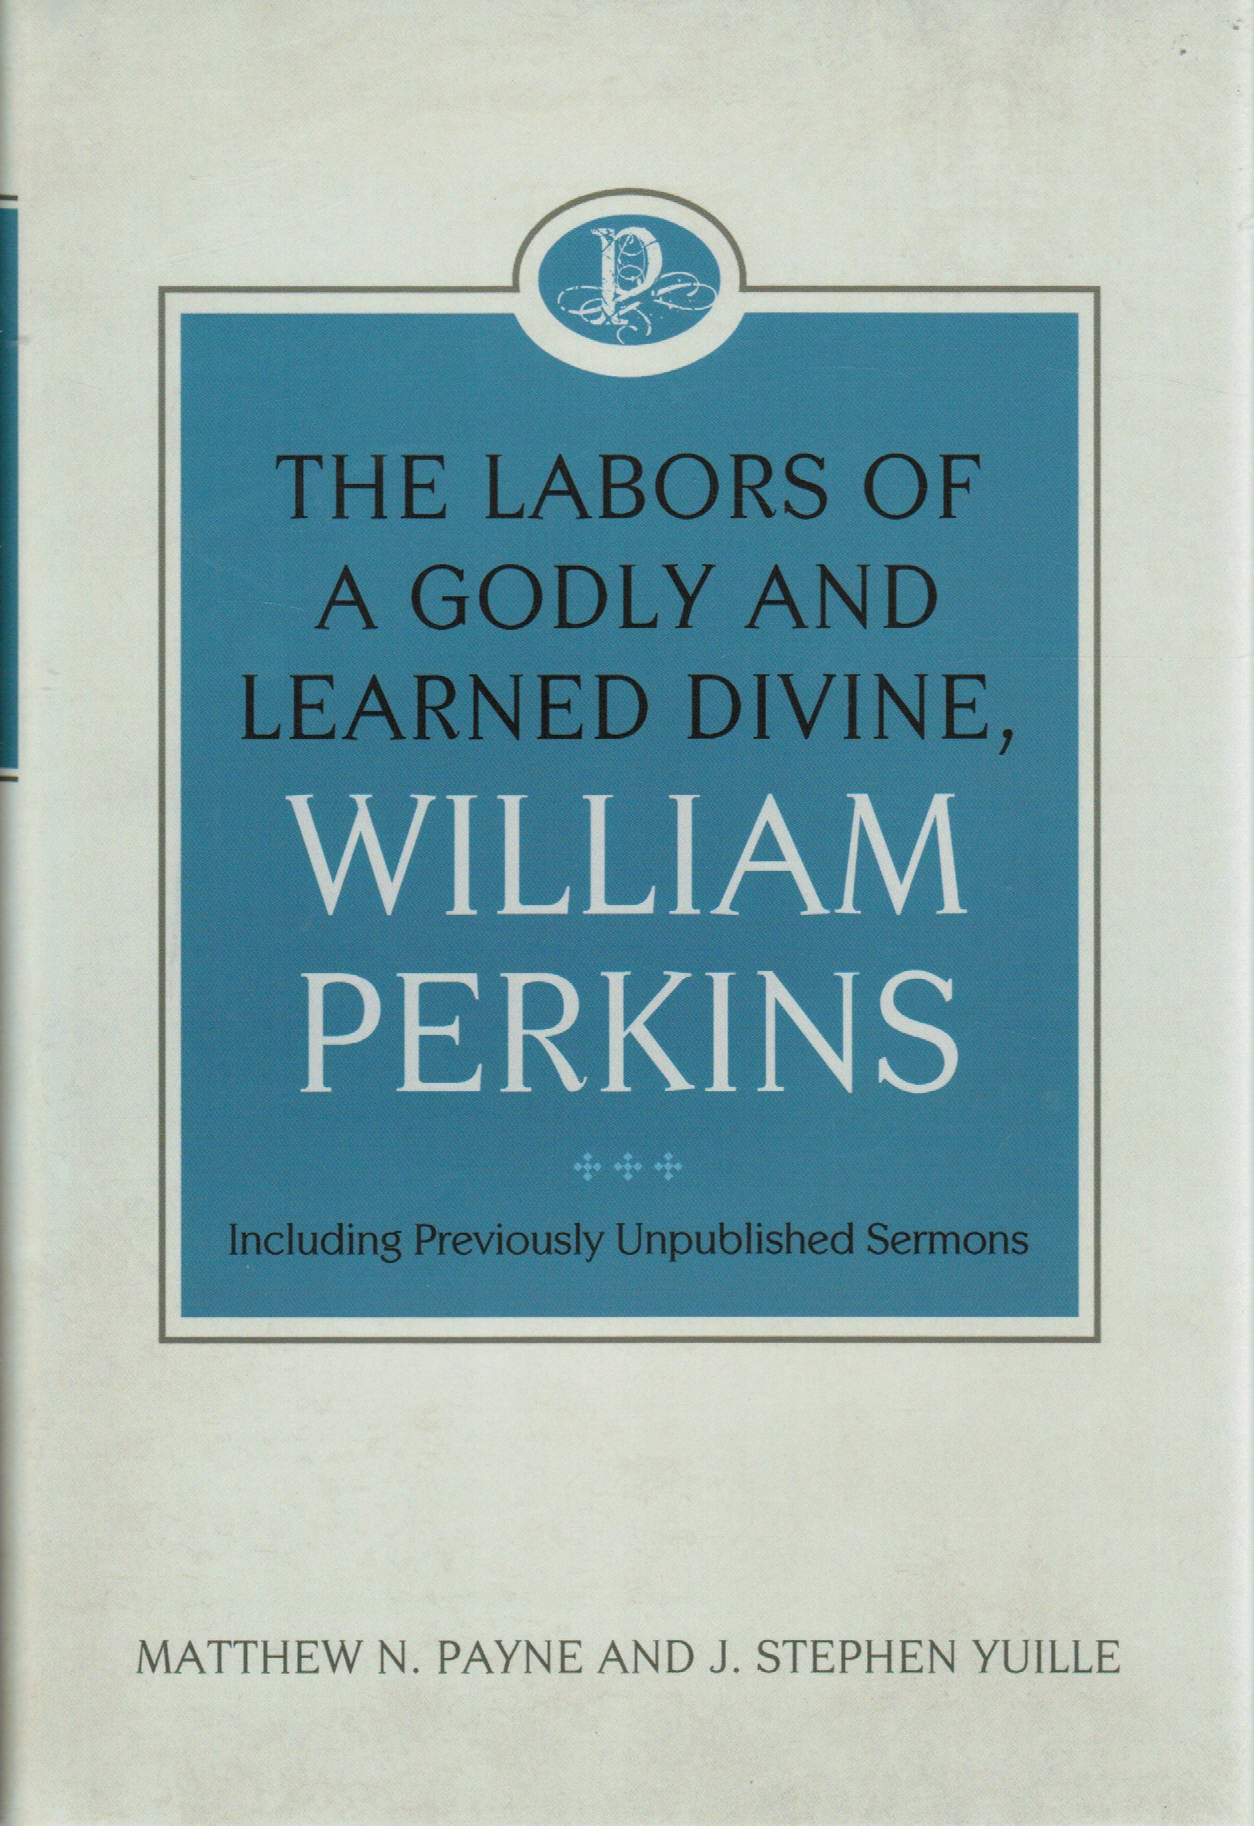 The Labors of a Godly and Learned Divine, William Perkins [including previously unpublished sermons]